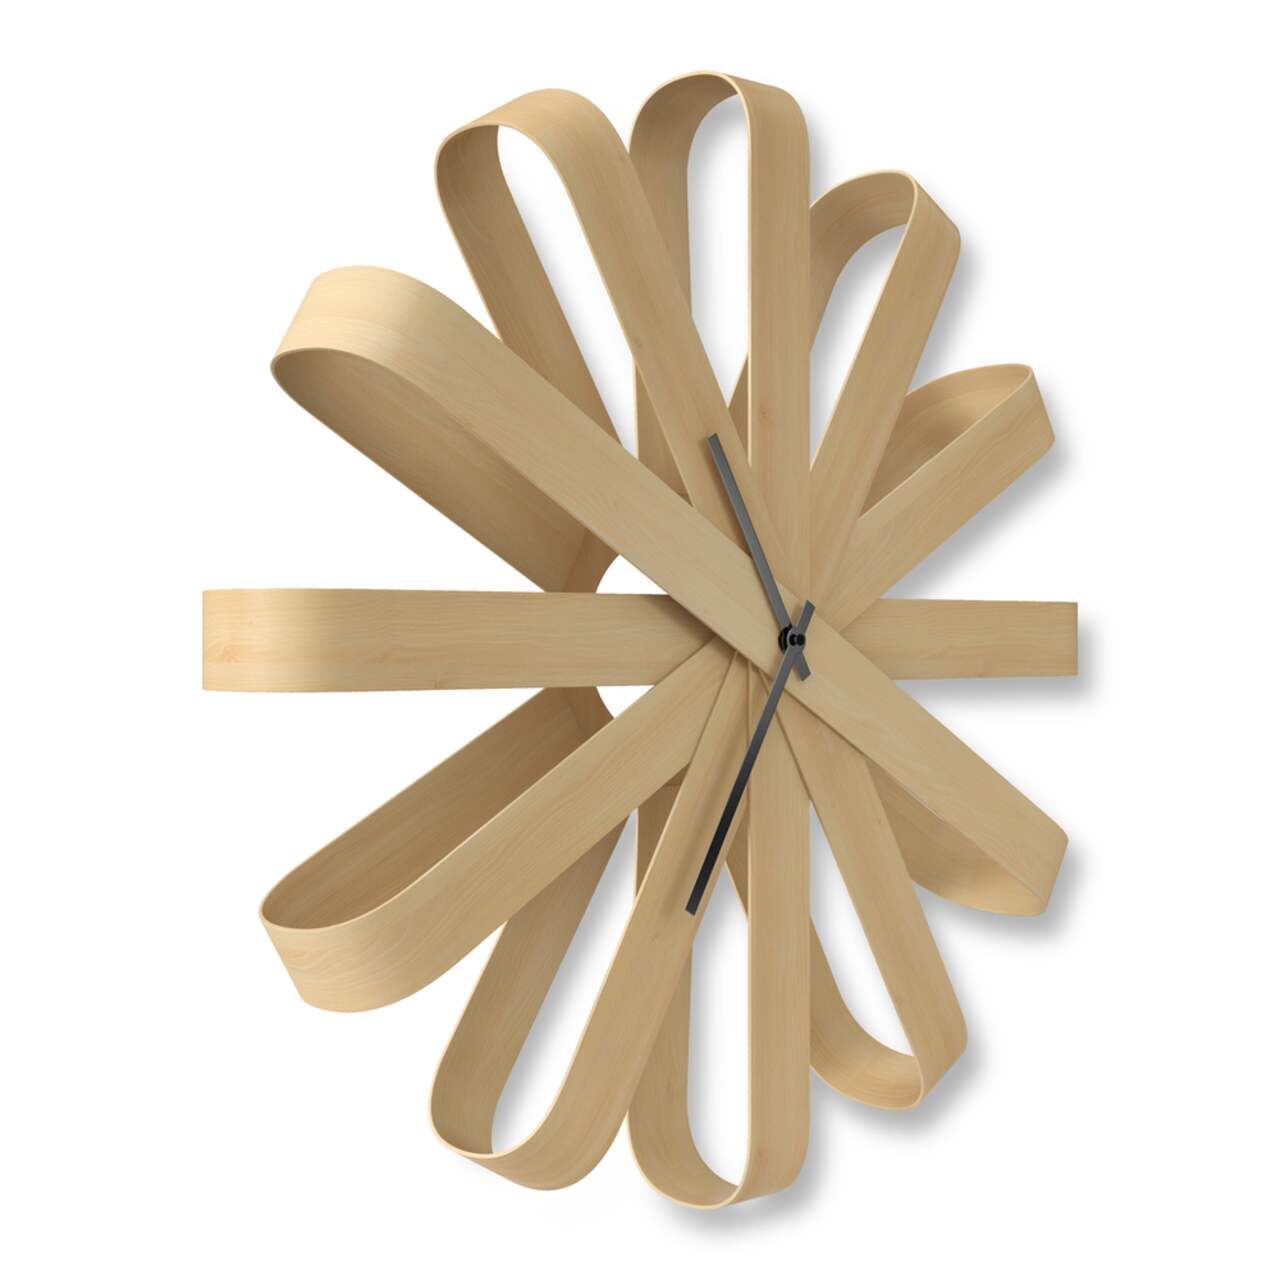 Umbra Ribbon Round Wooden Wall Clock, Natural, 20-in